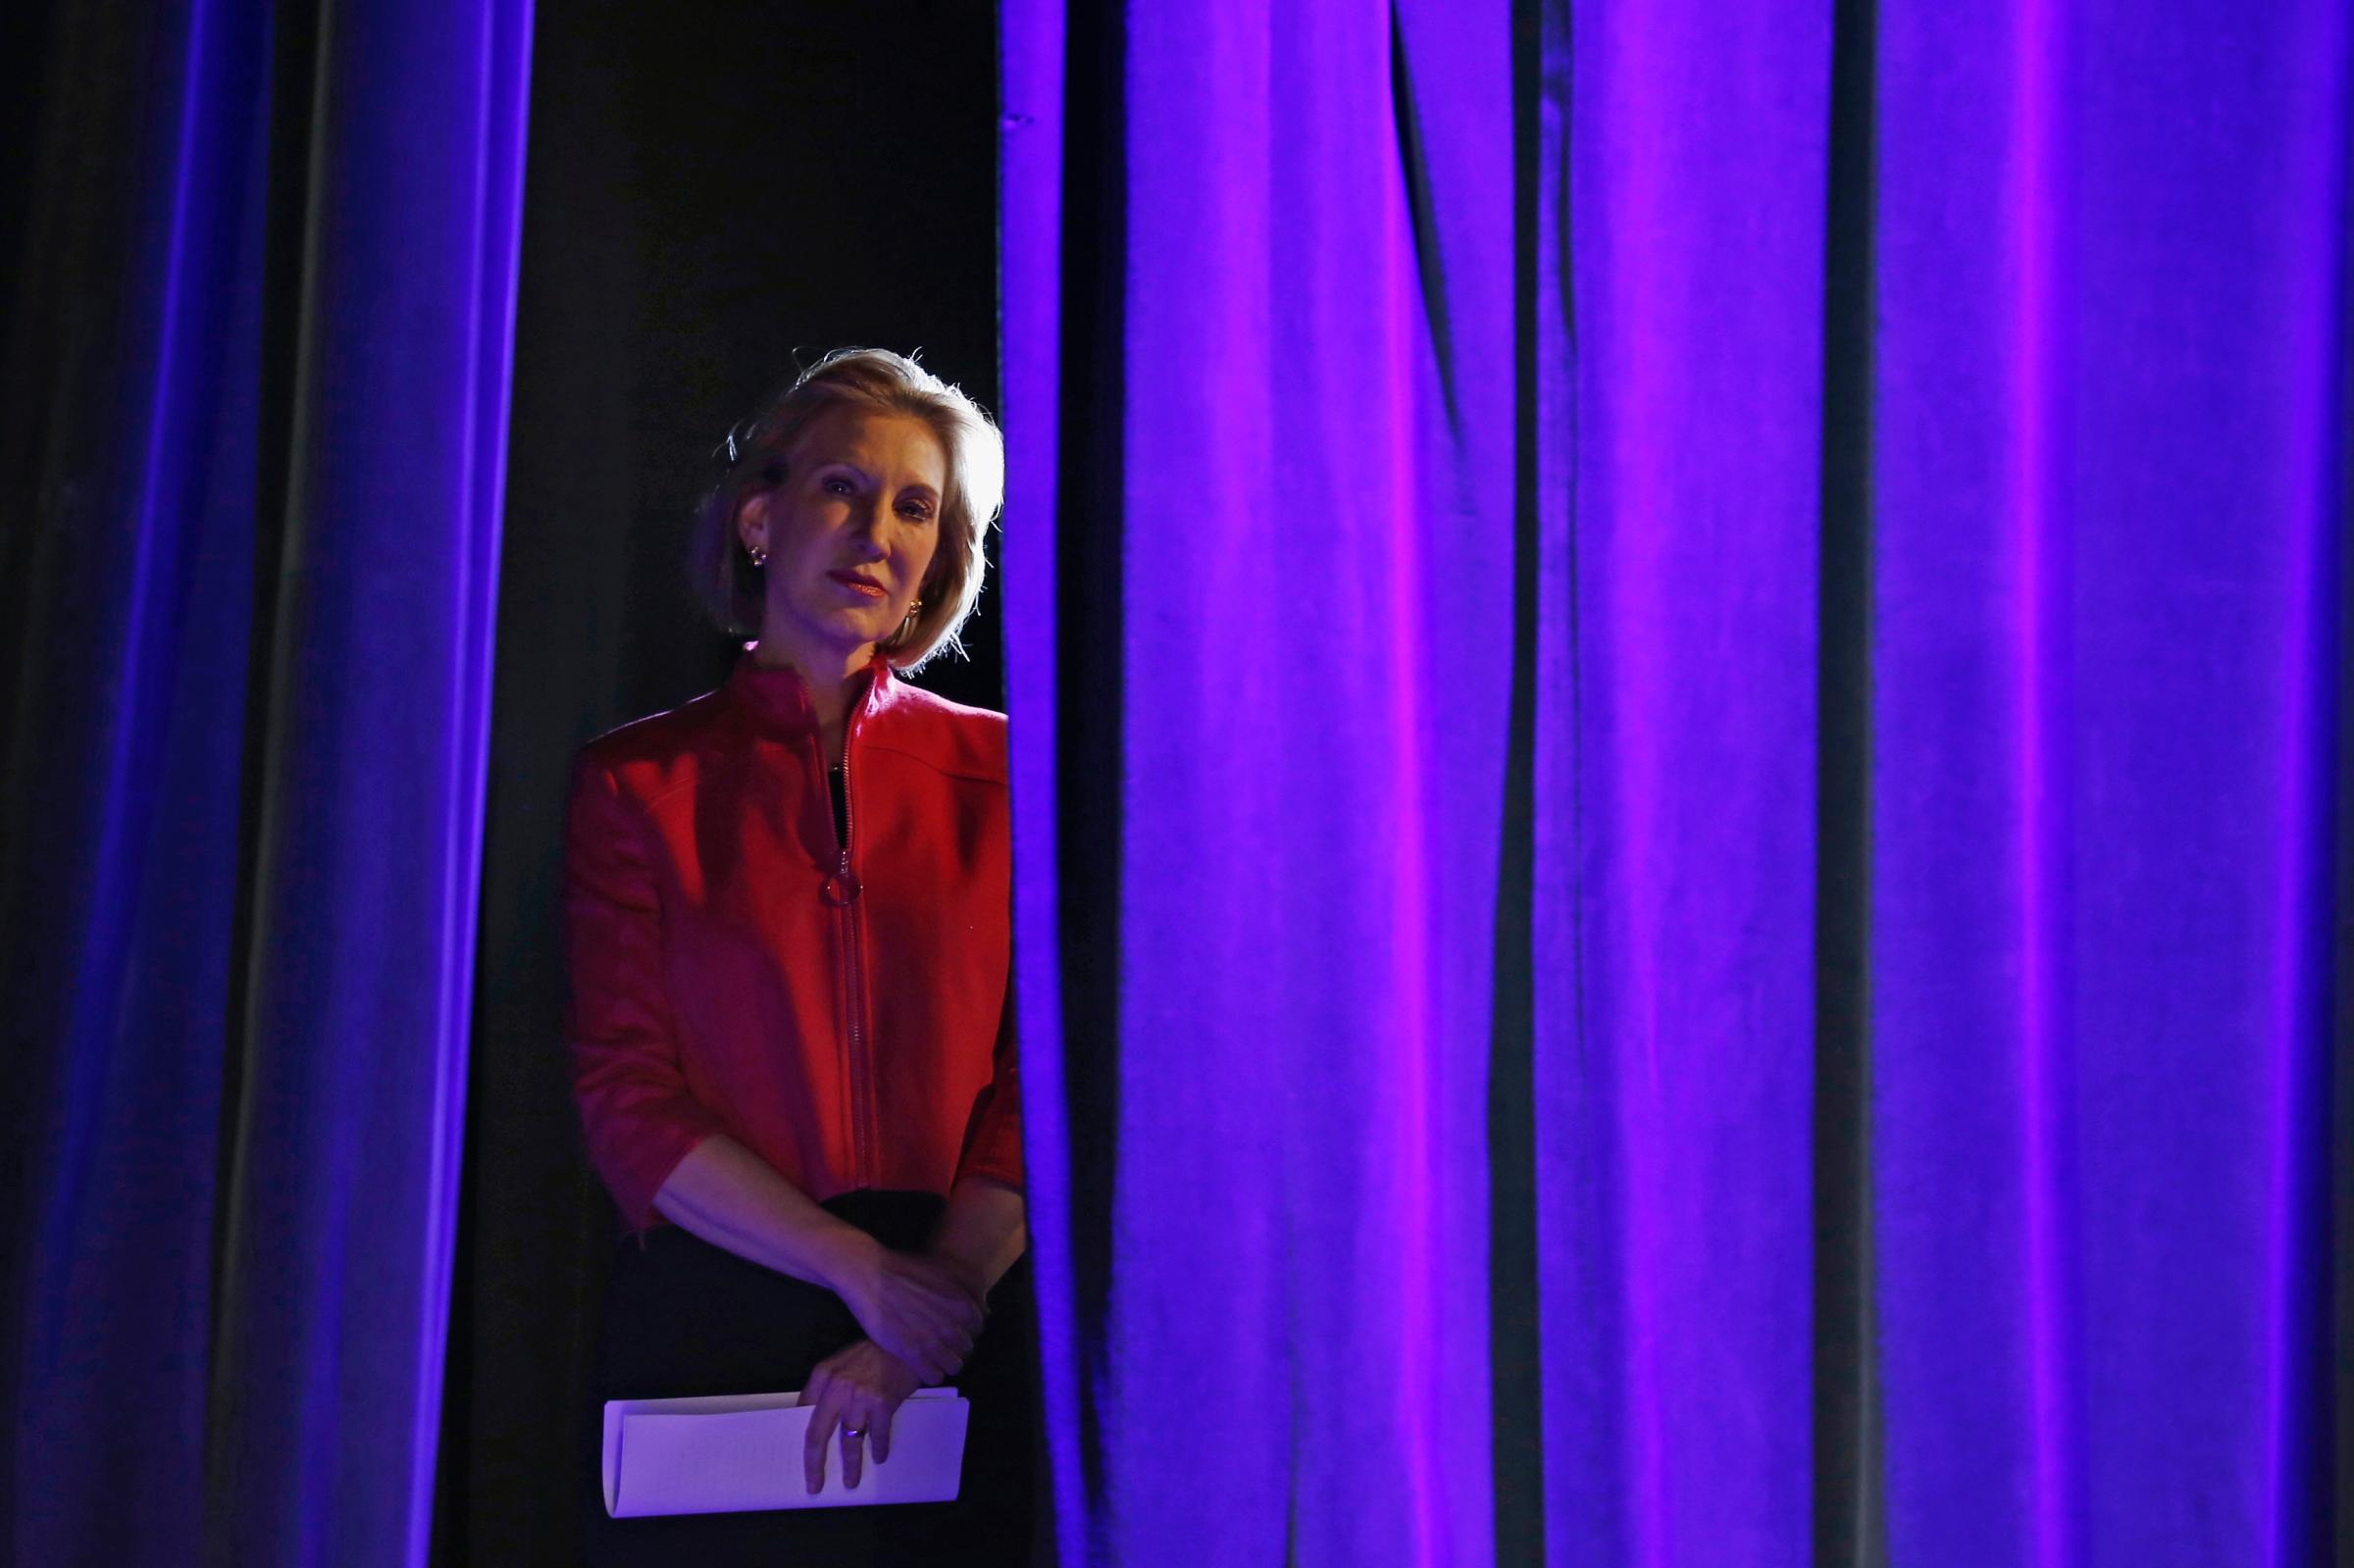 Former Hewlett-Packard Co Chief Executive Officer Carly Fiorina listens to her introduction from the side of the stage at the Freedom Summit in Des Moines, Iowa on Jan. 24, 2015.